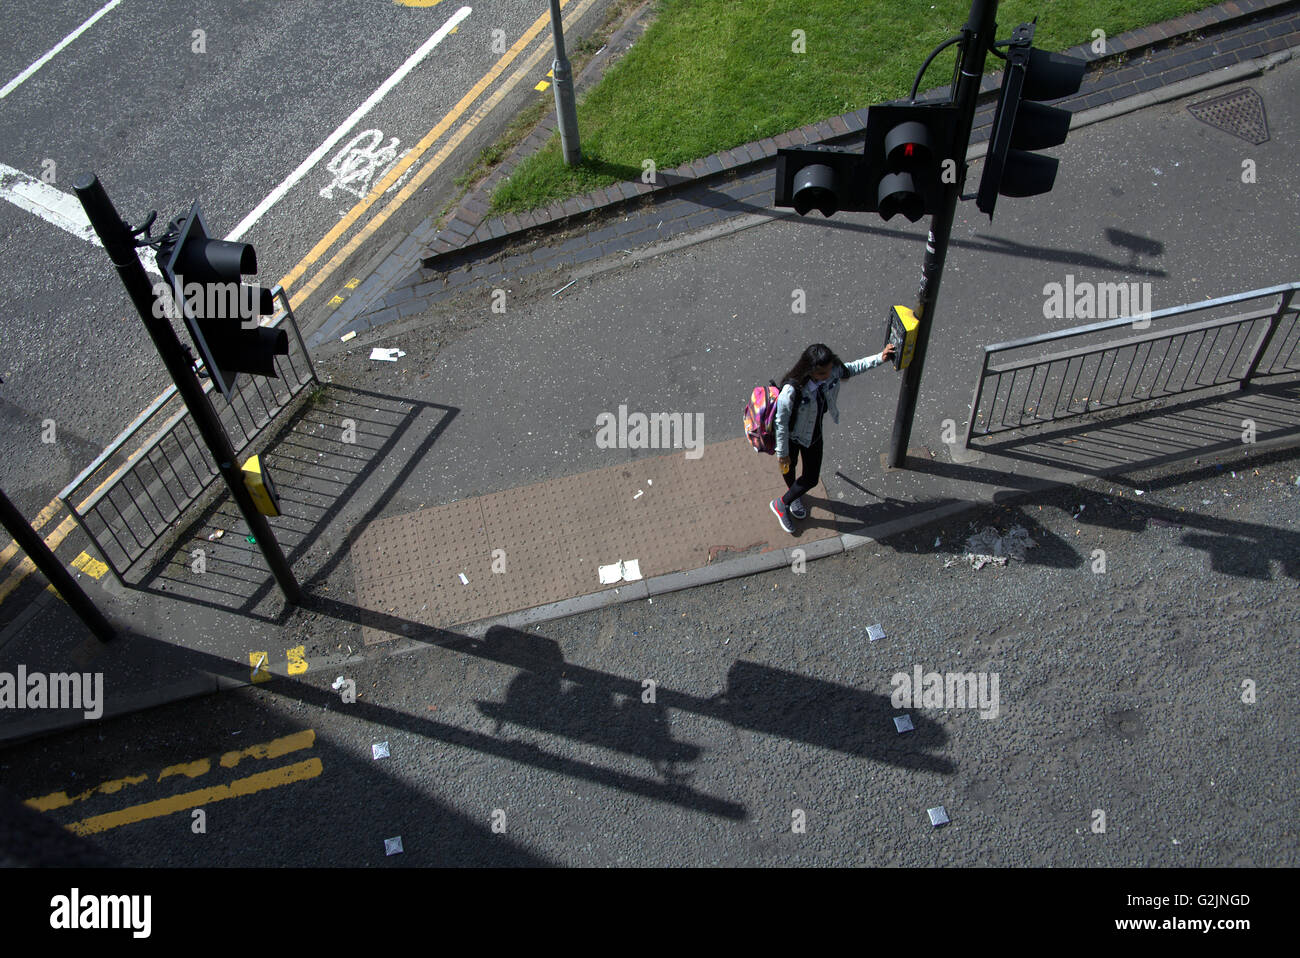 Young girl schoolgirl crosses road from above at traffic lights, Glasgow, Scotland, UK. Stock Photo